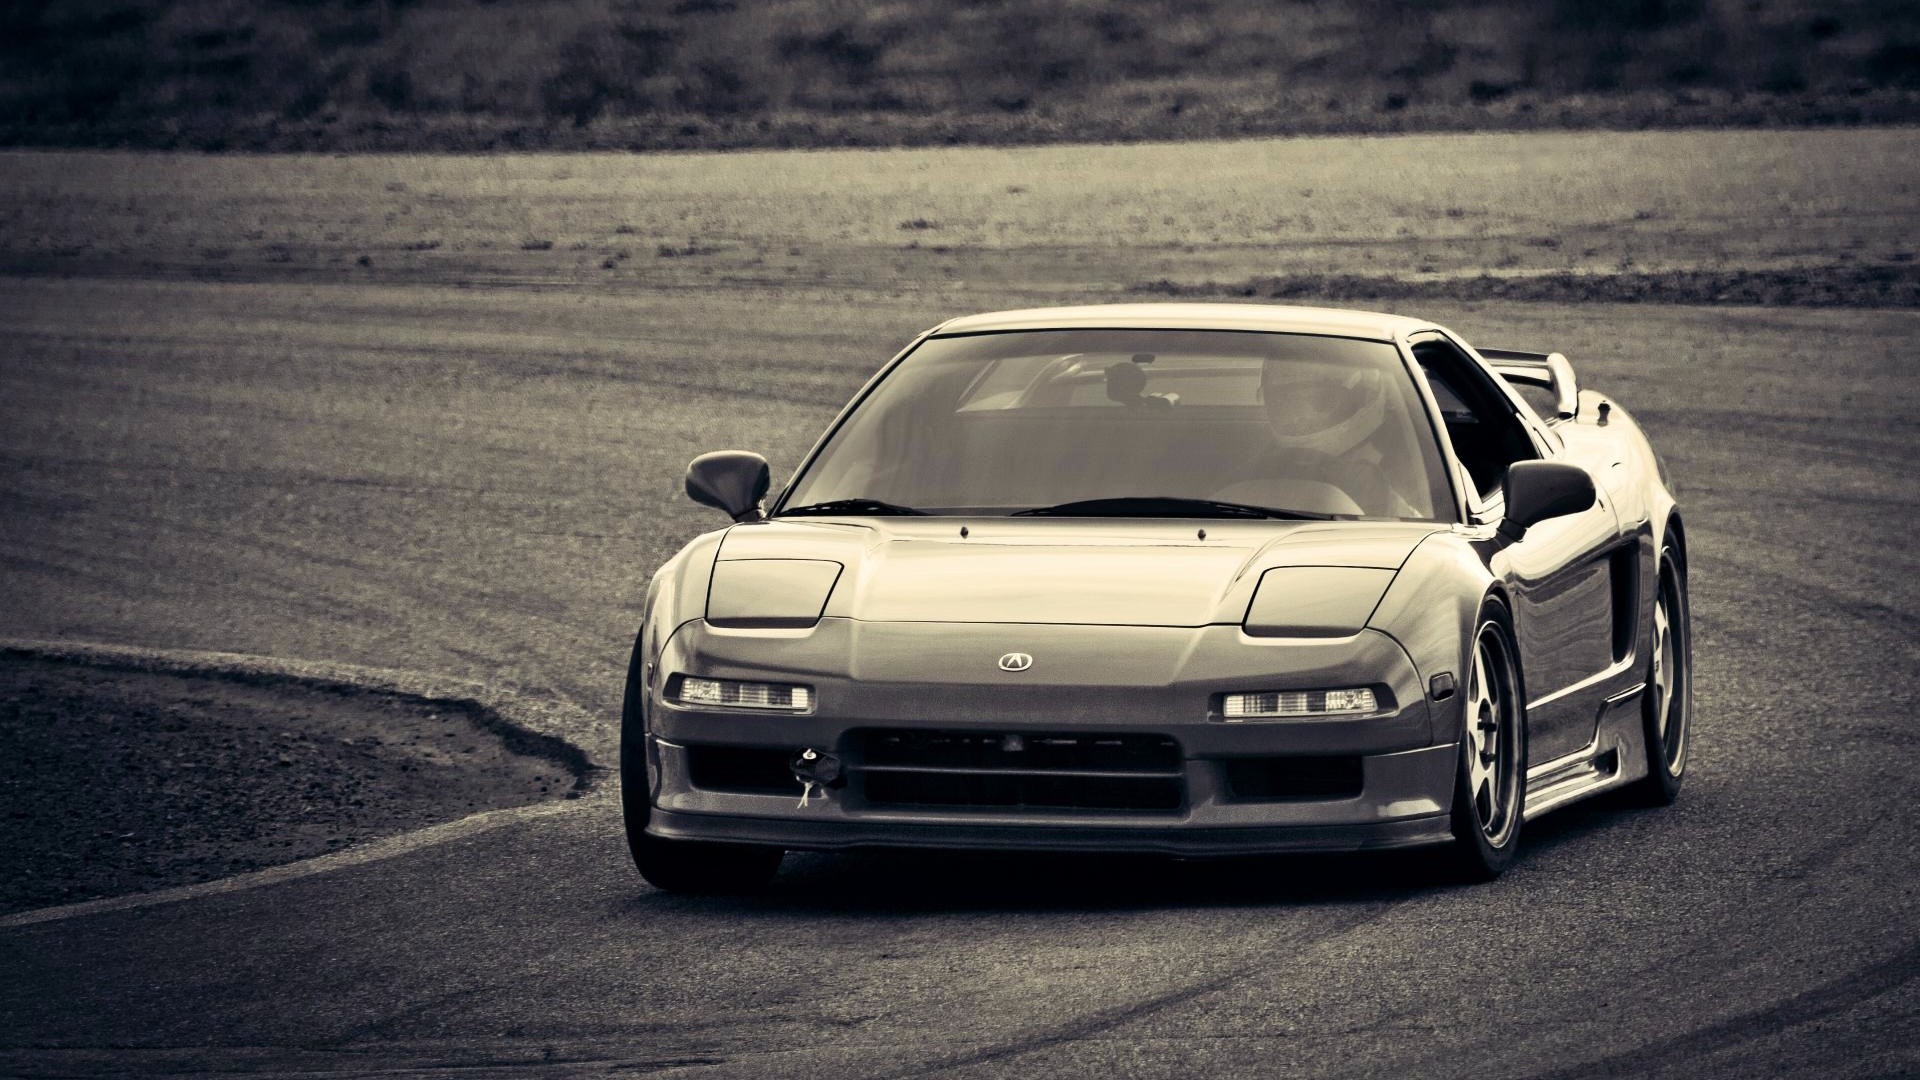 Acura Nsx Jdm HD Wallpaper Background Image